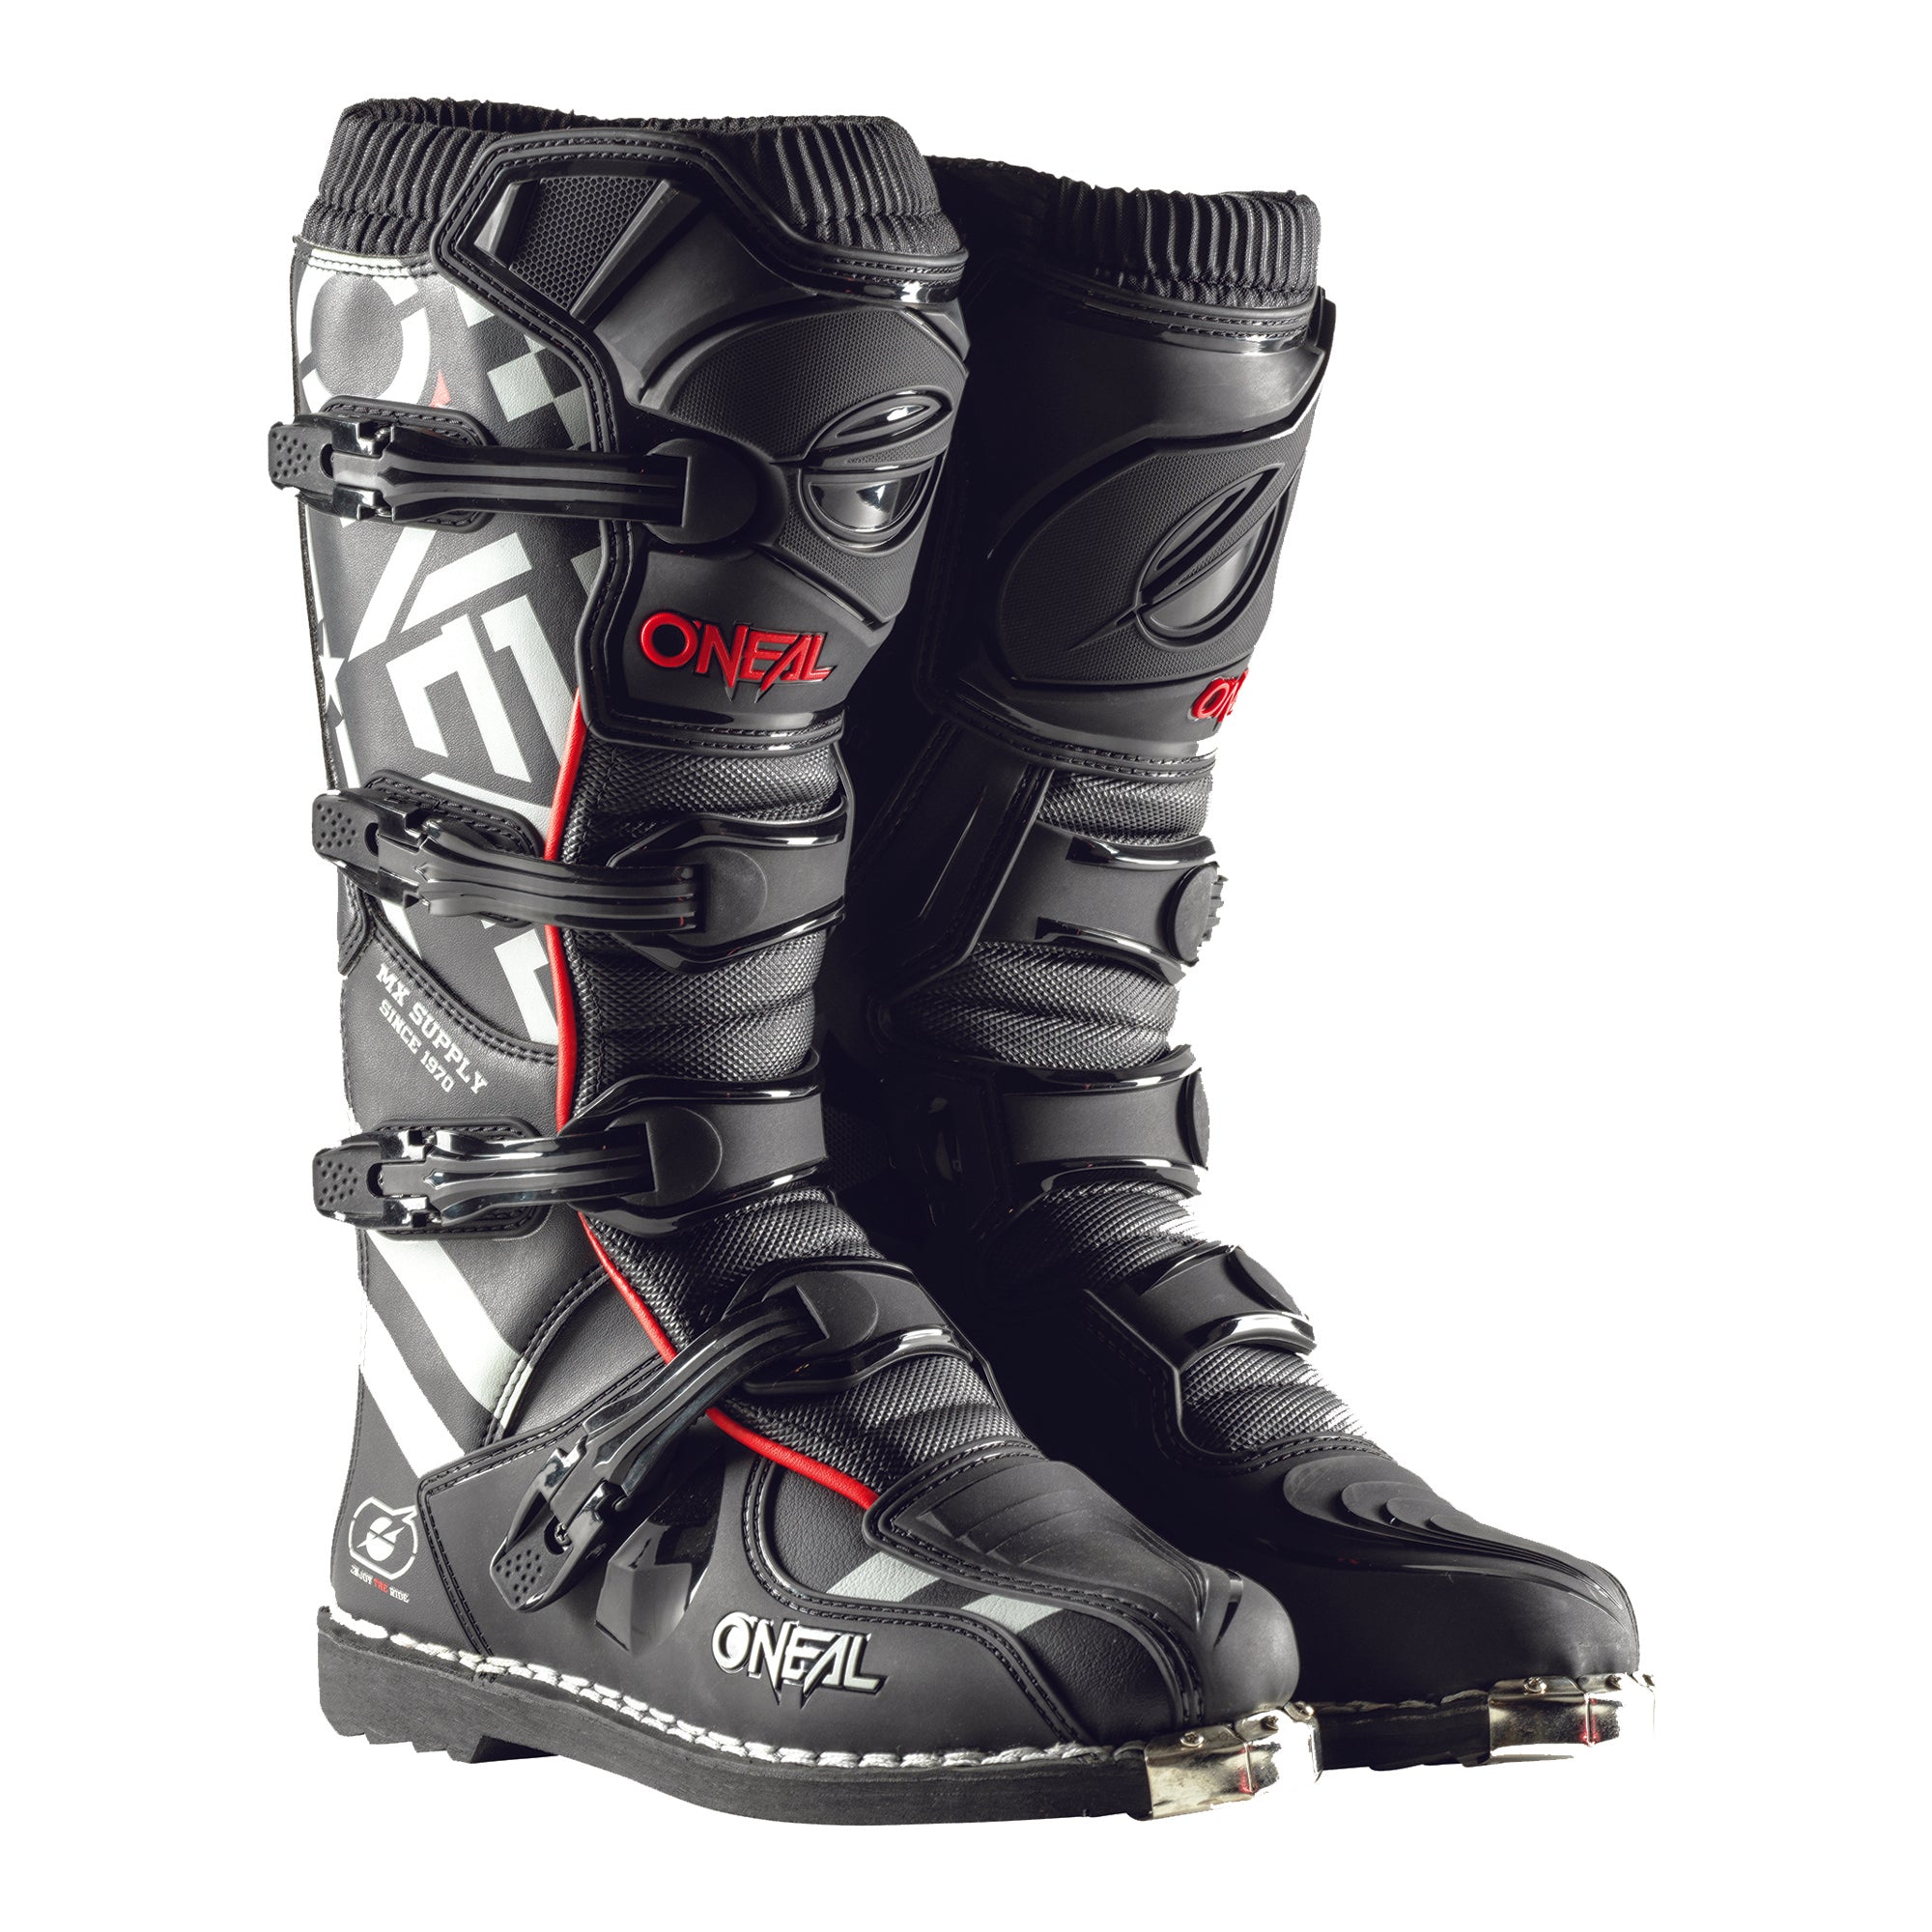 ELEMENT BOOT – ONEAL USA